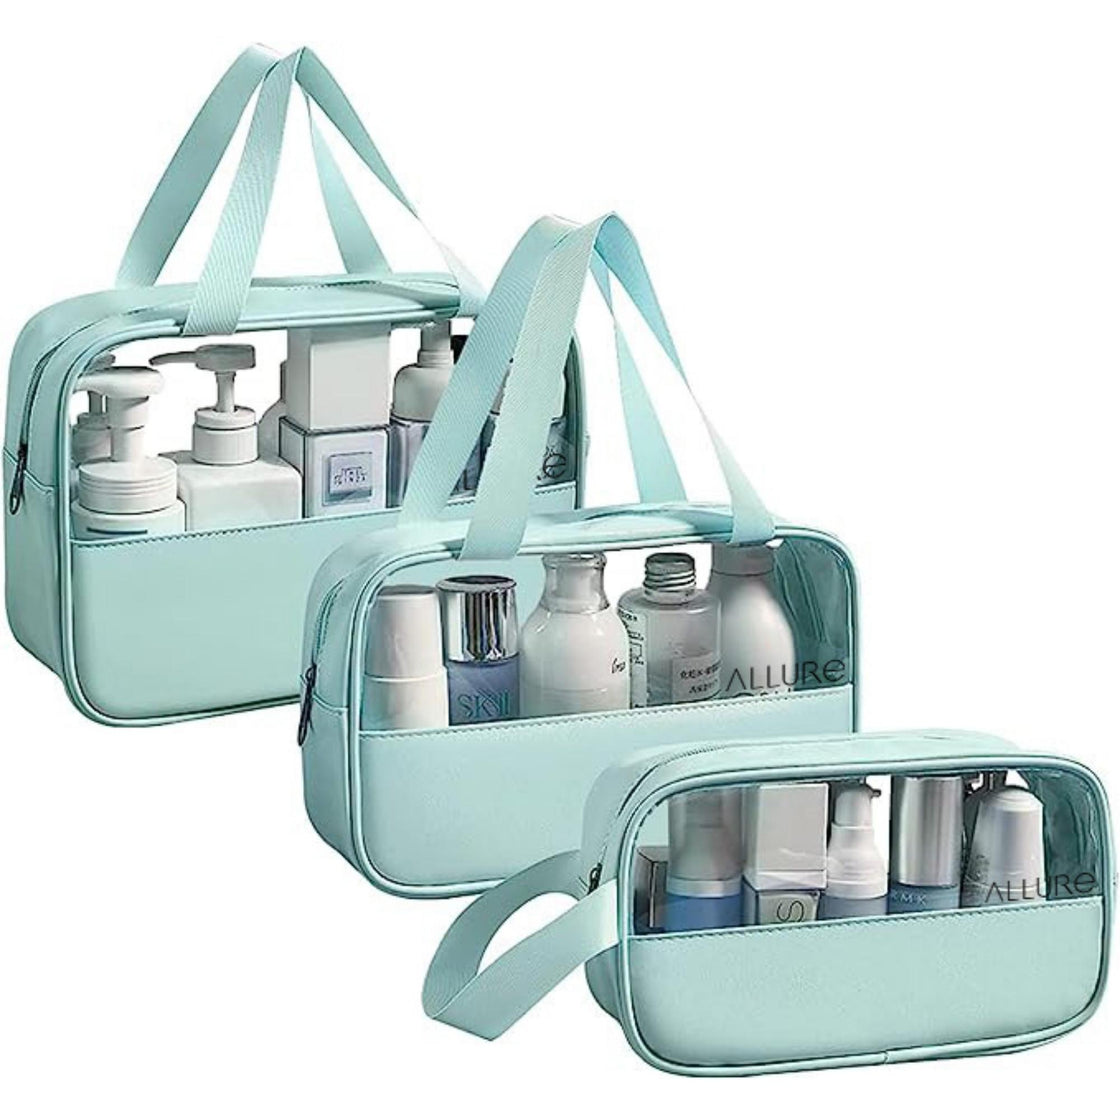 Allure Pack of 3 Toiletry Bag Green